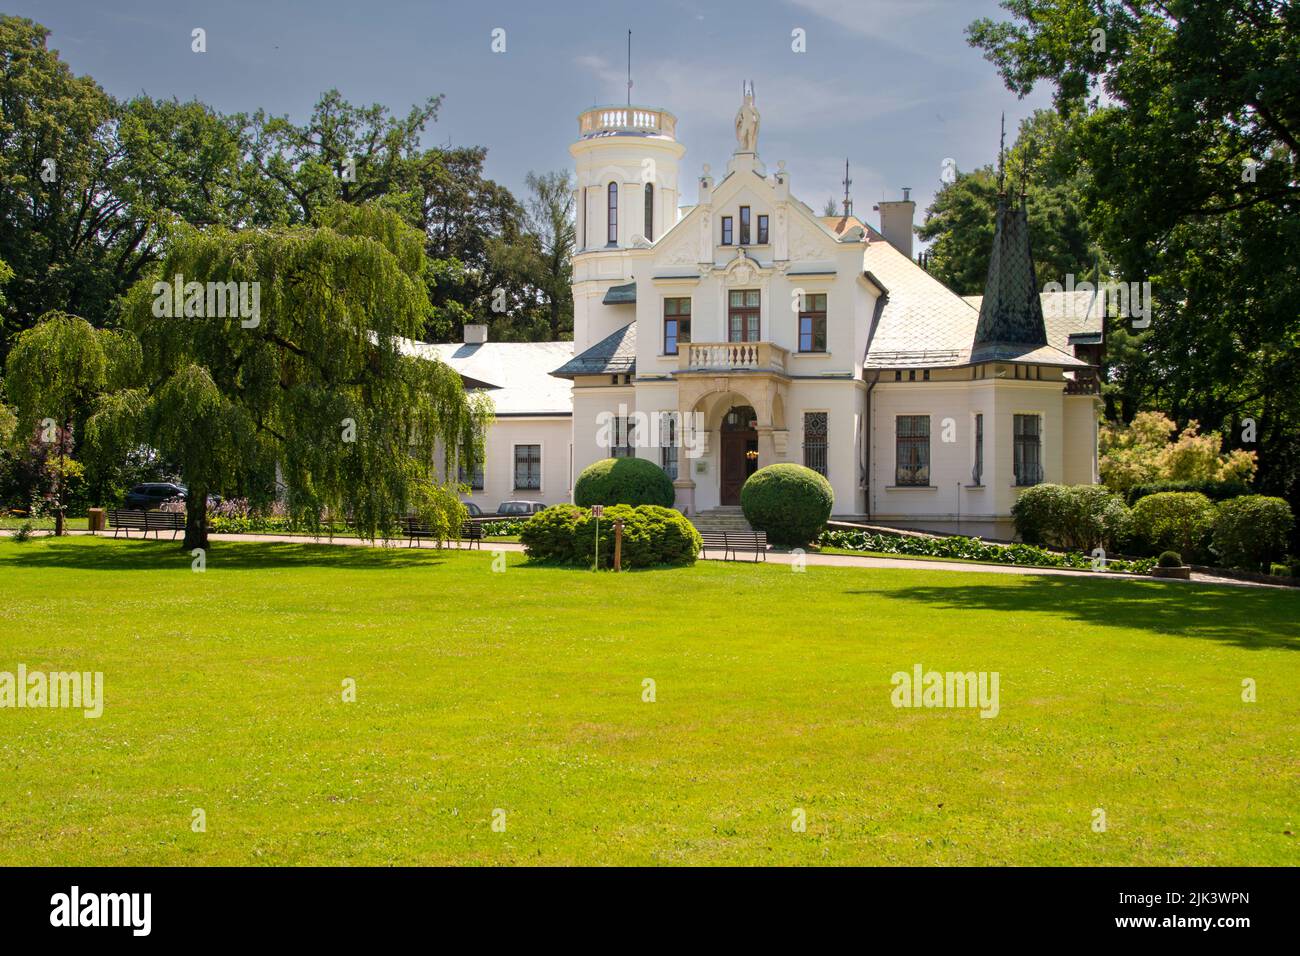 A manor house in a park in the village of Oglegorek, Poland. Stock Photo